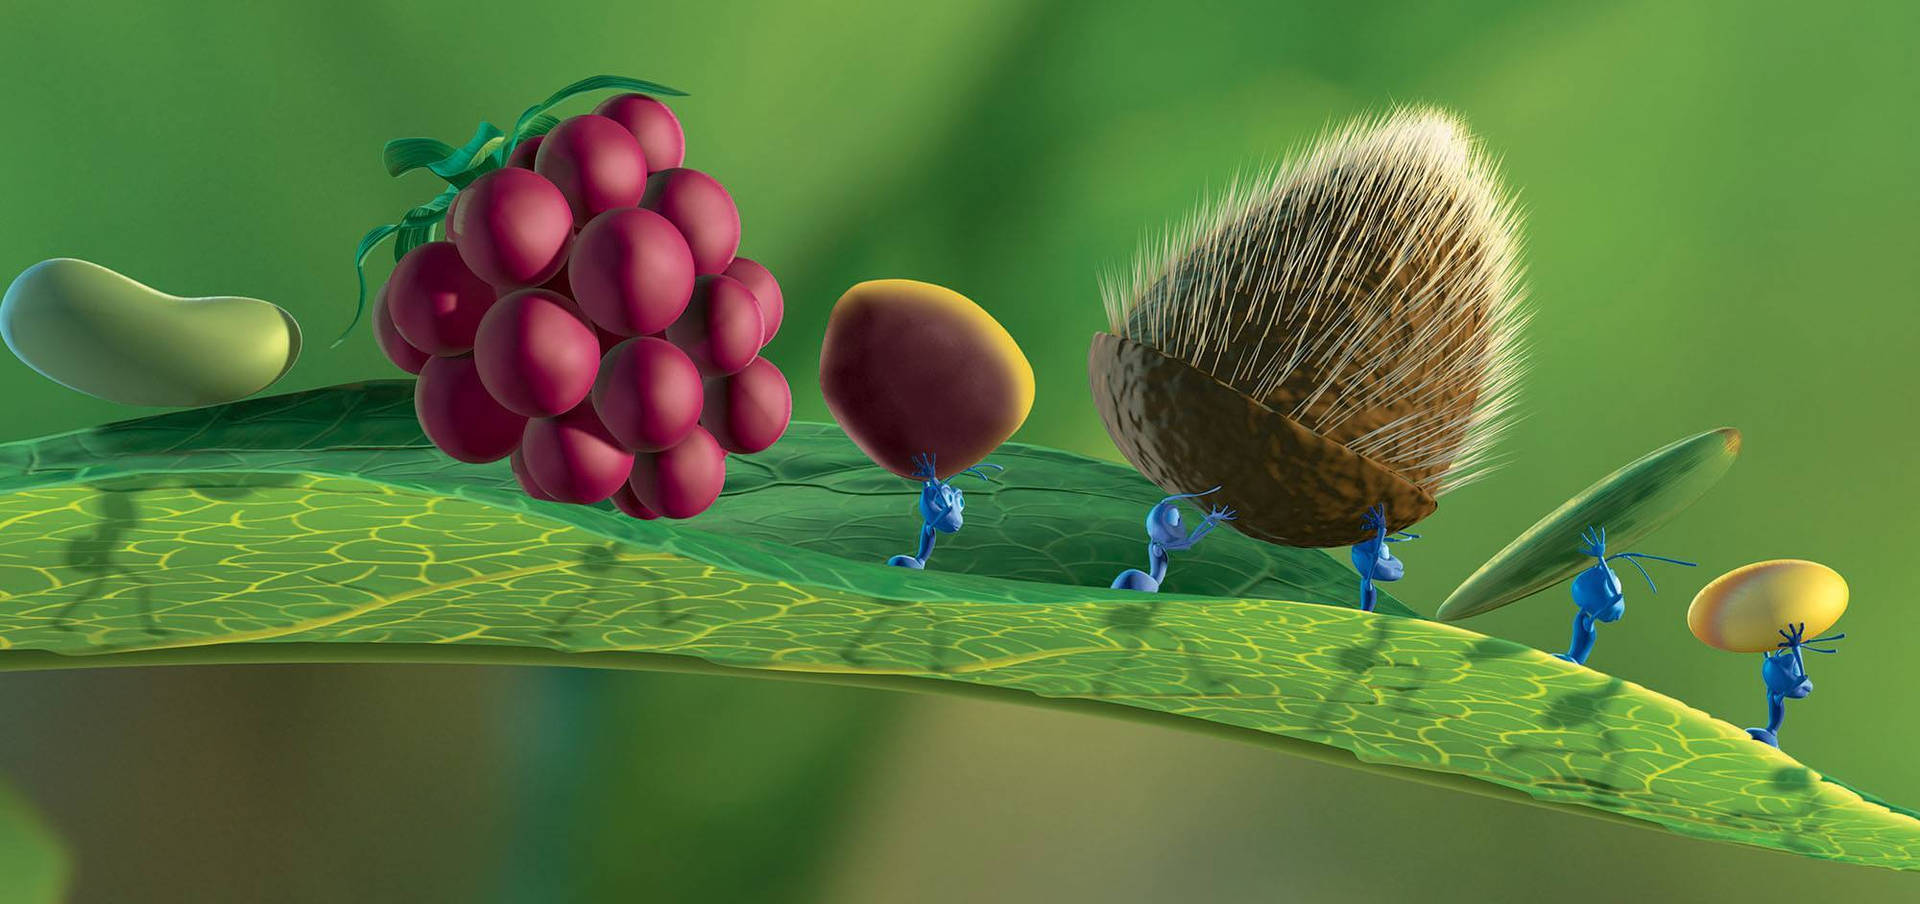 A Bug's Life Food Background